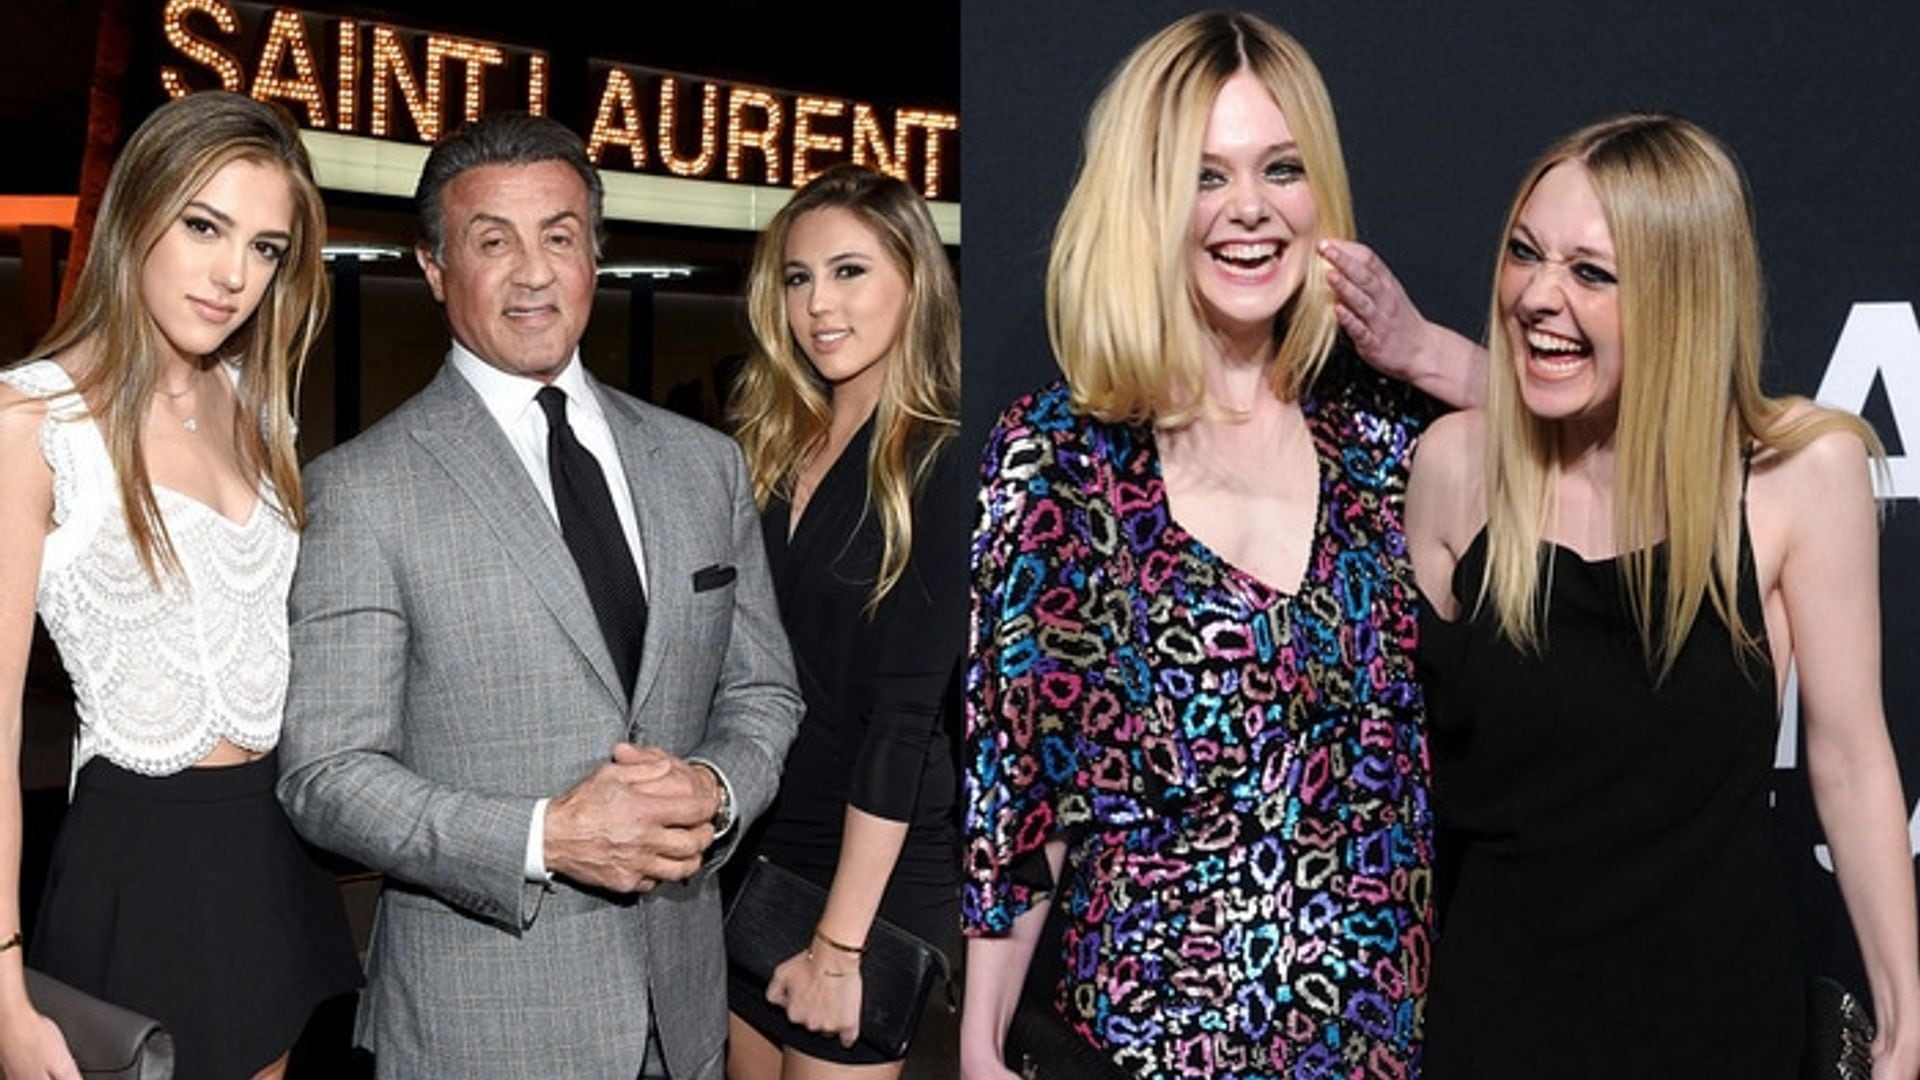 The Saint Laurent show in L.A. was a star-studded family affair